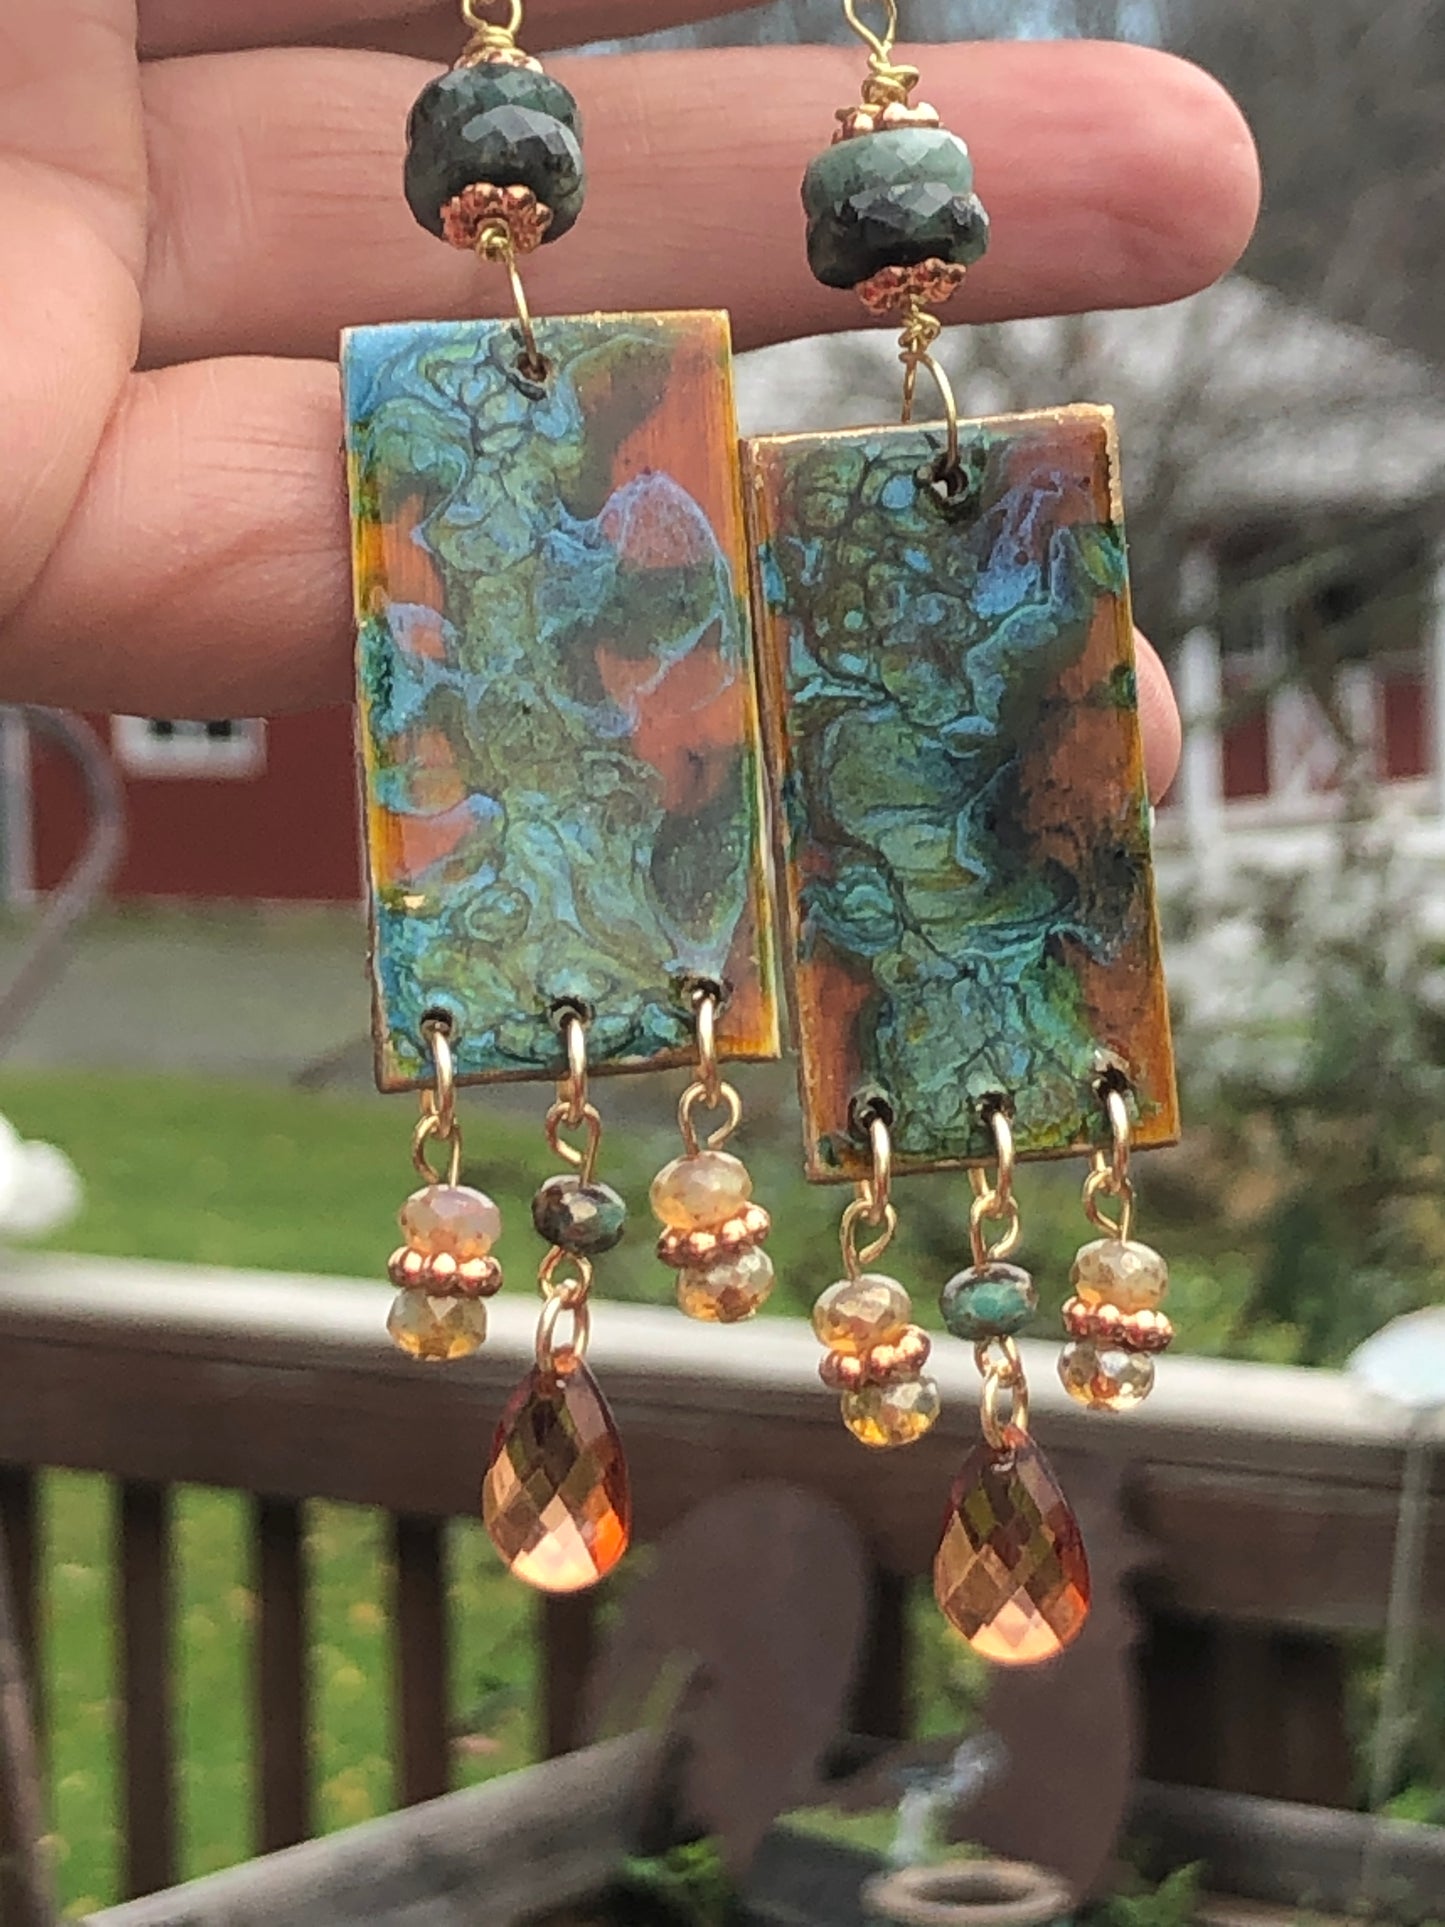 Fire and Water, Paint Pour Earrings with Faceted Emerald and Czech Beads